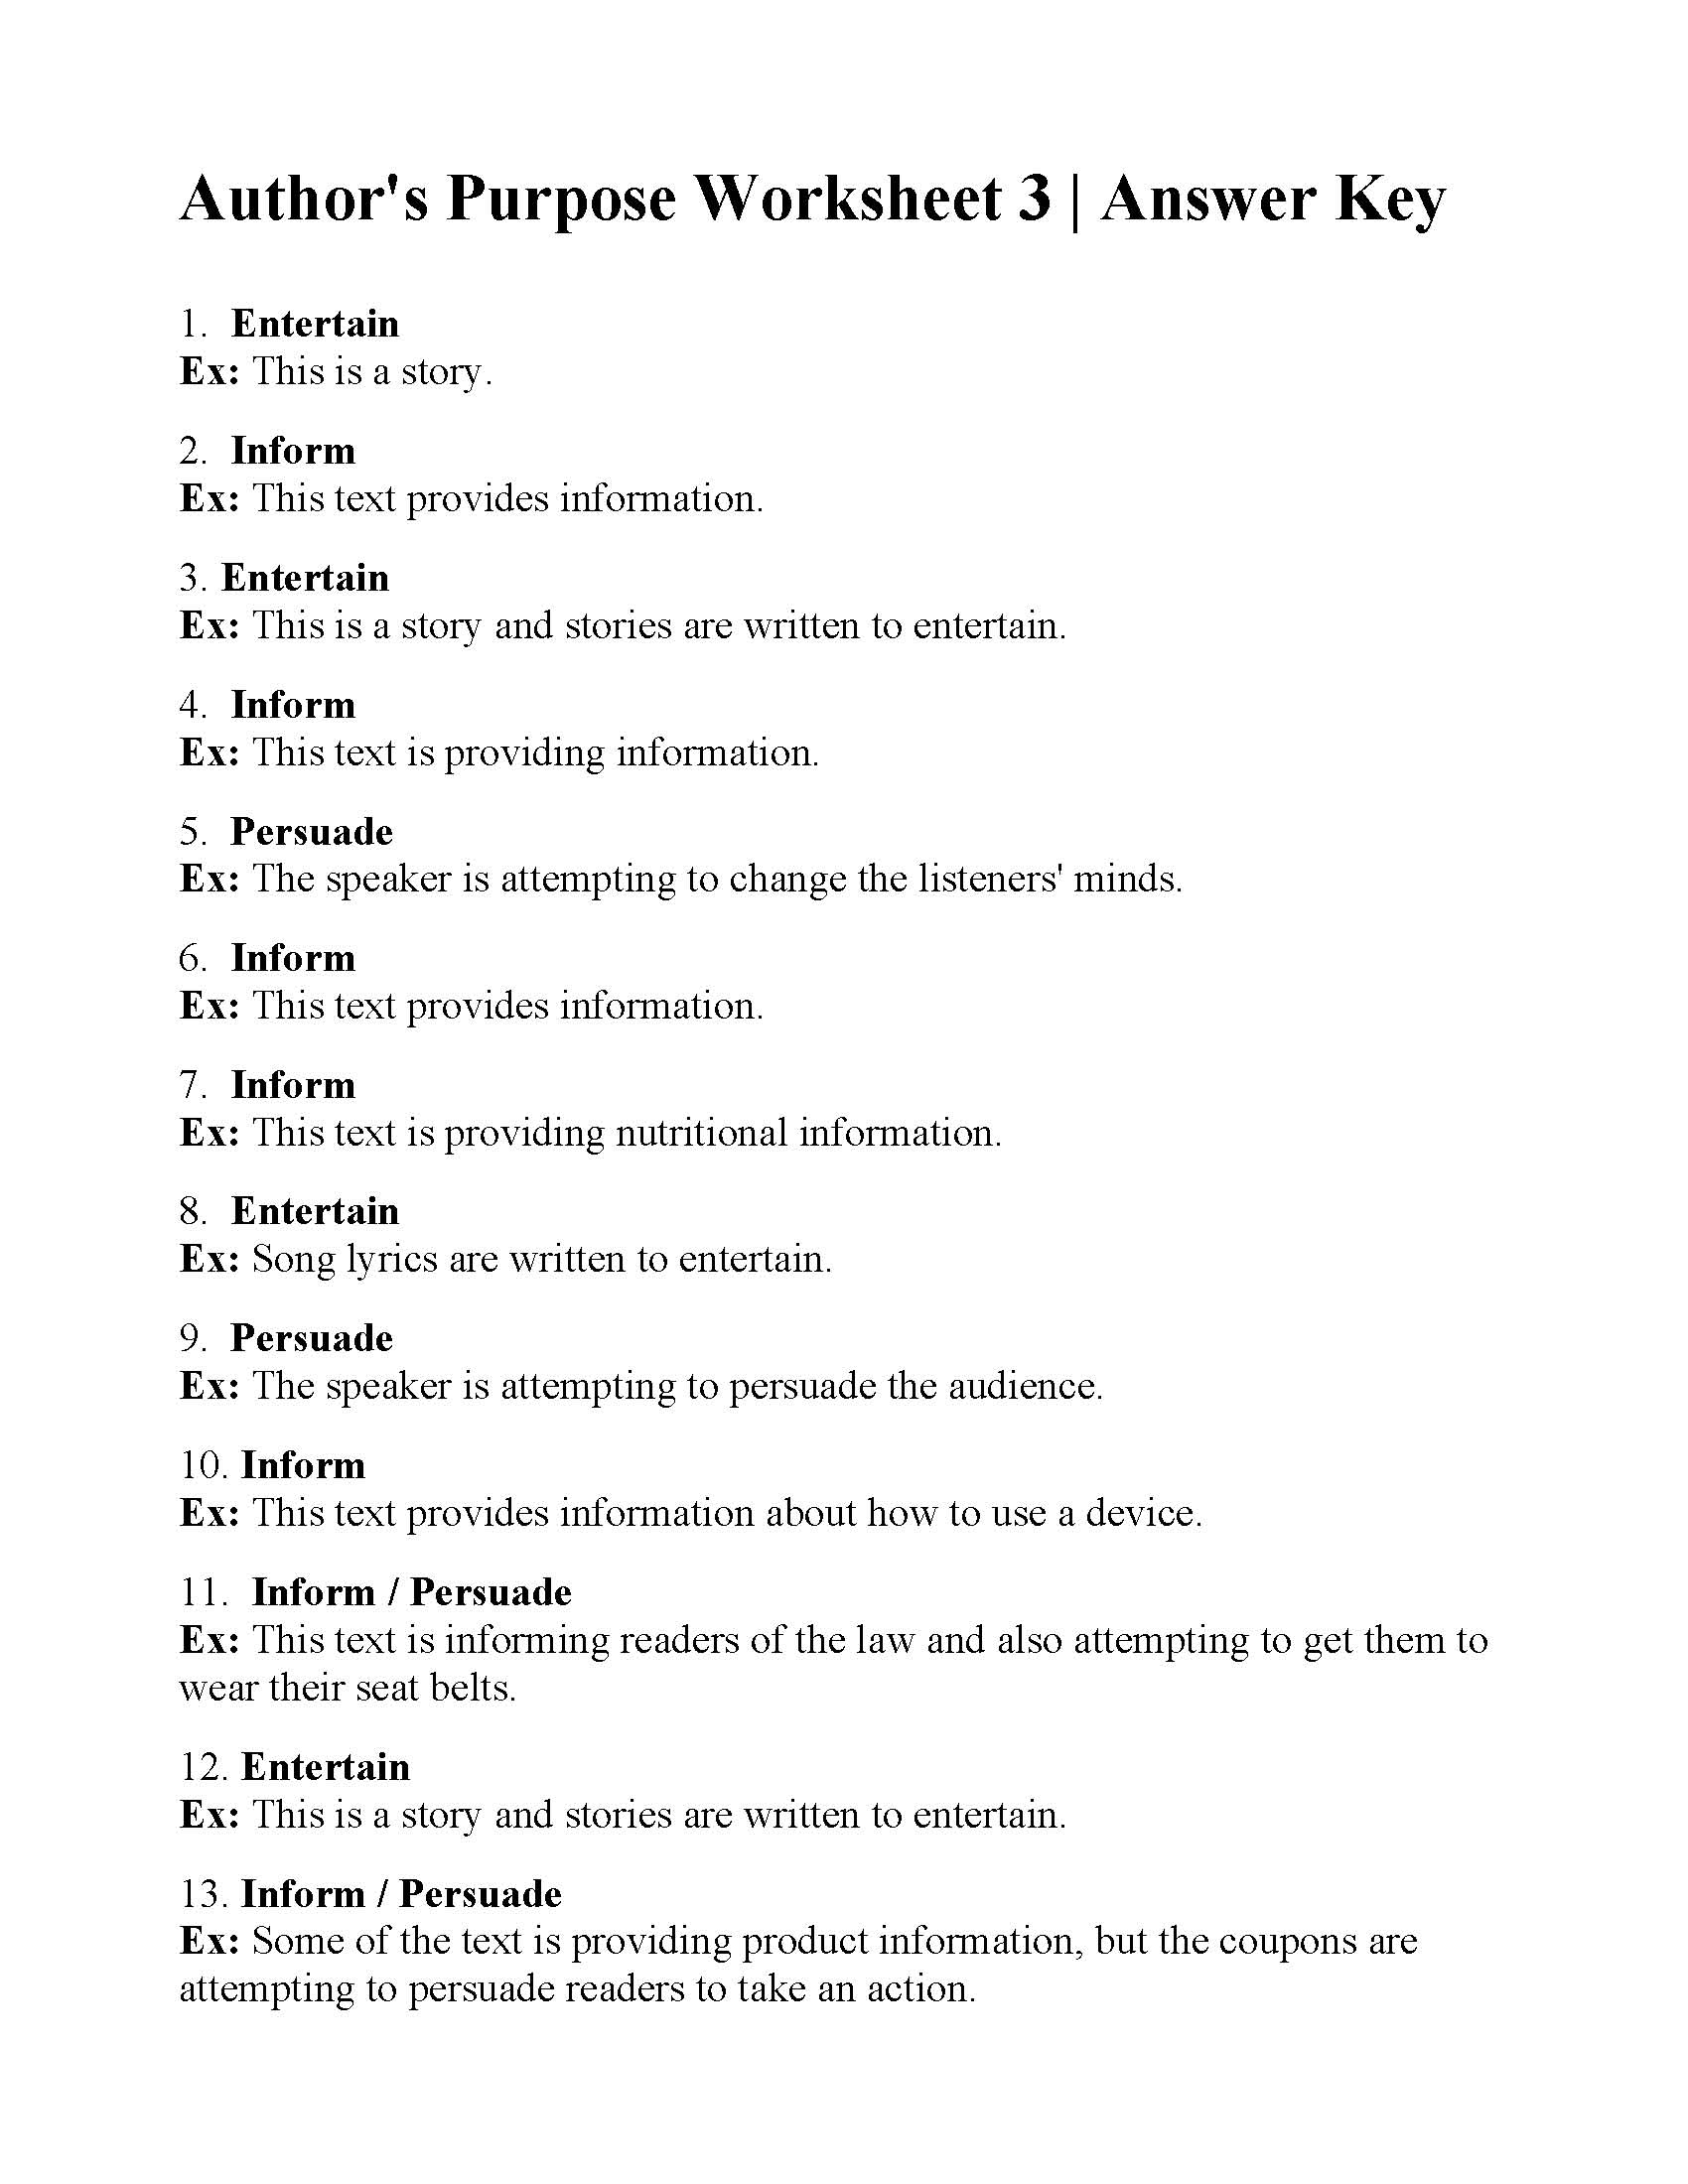 This is a preview image of Author's Purpose Worksheet 3. Click on it to enlarge it or view the source file.